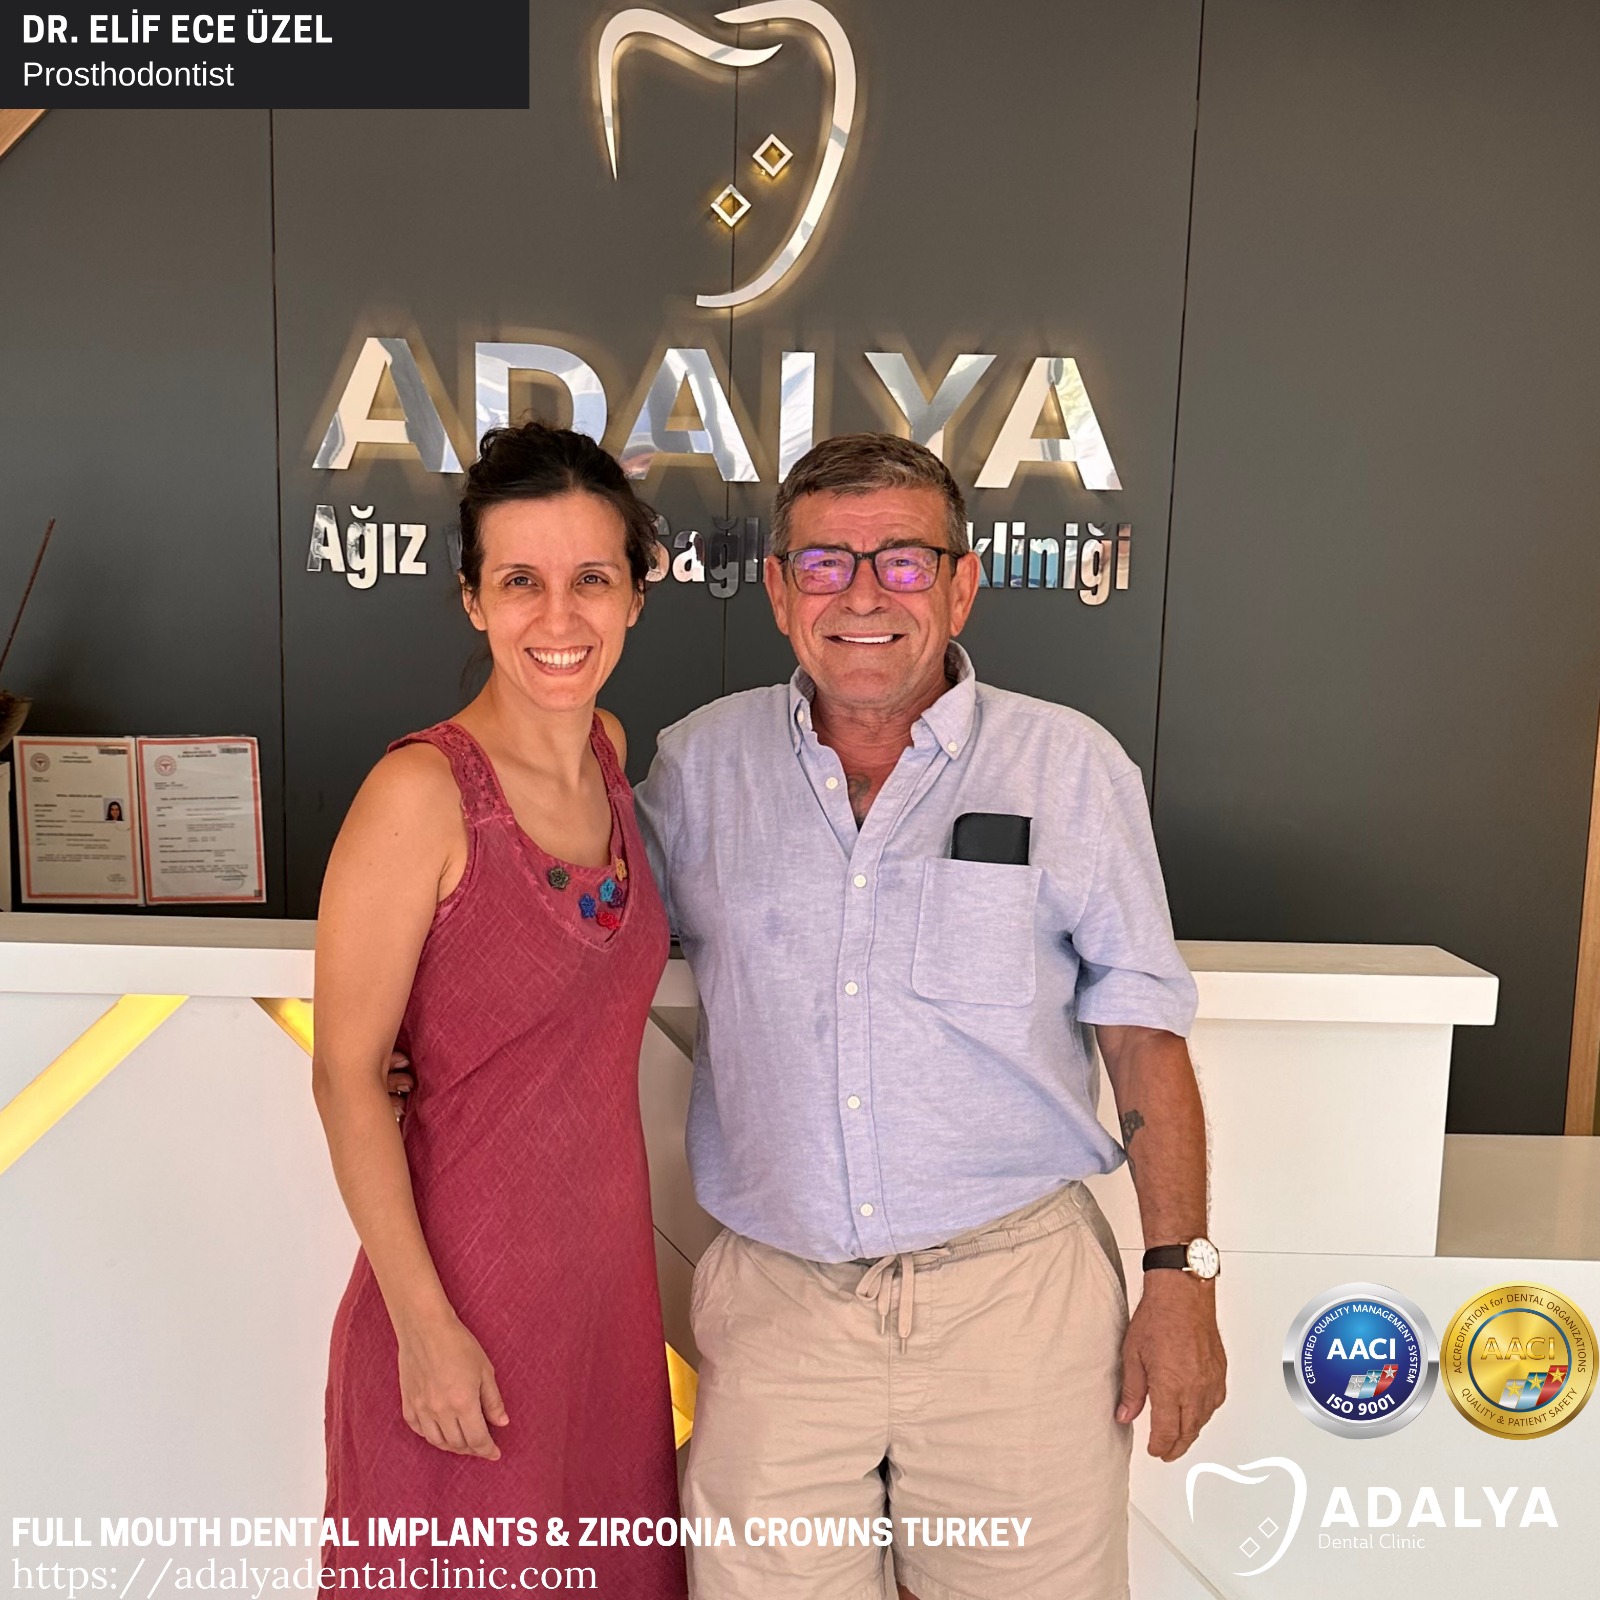 full mouth dental implants turkey antalya price package deals cost clinic centre adalya